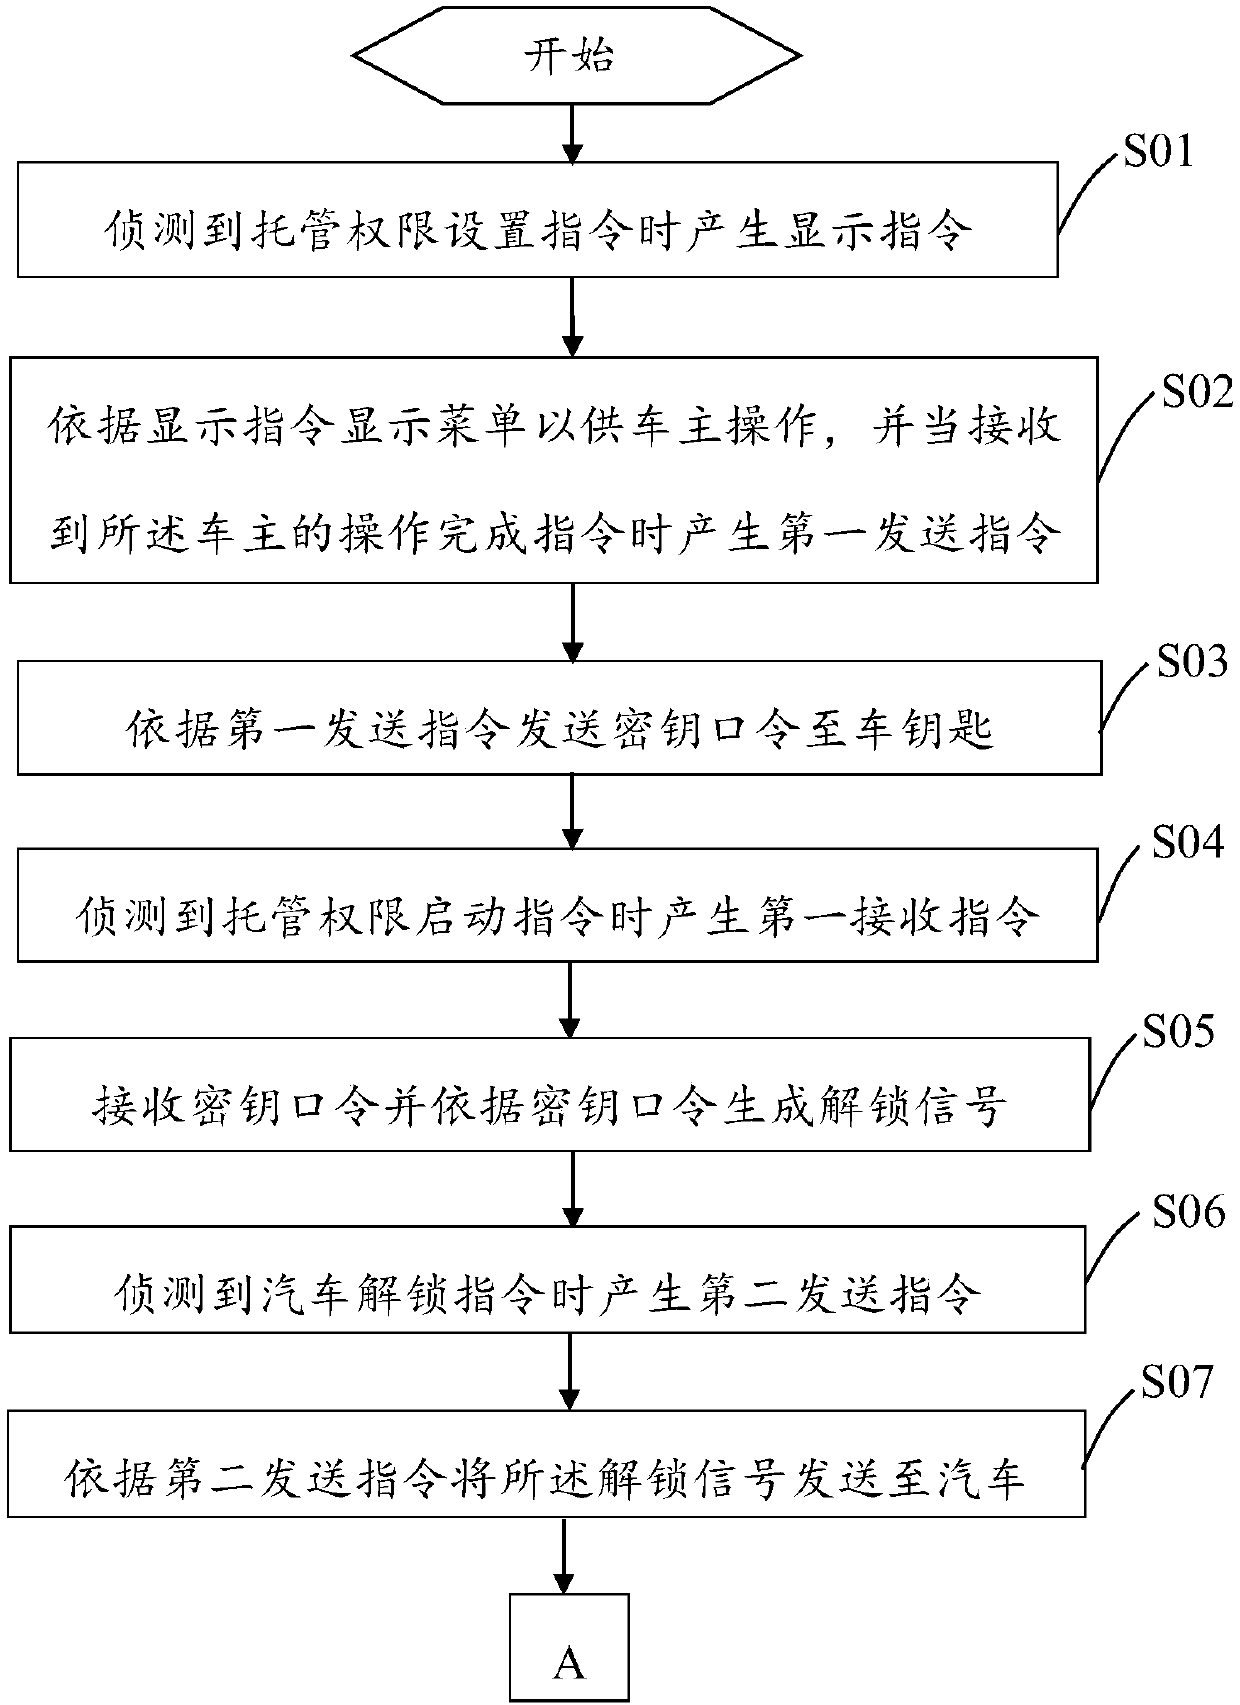 System and method for setting automobile commissioned management permission